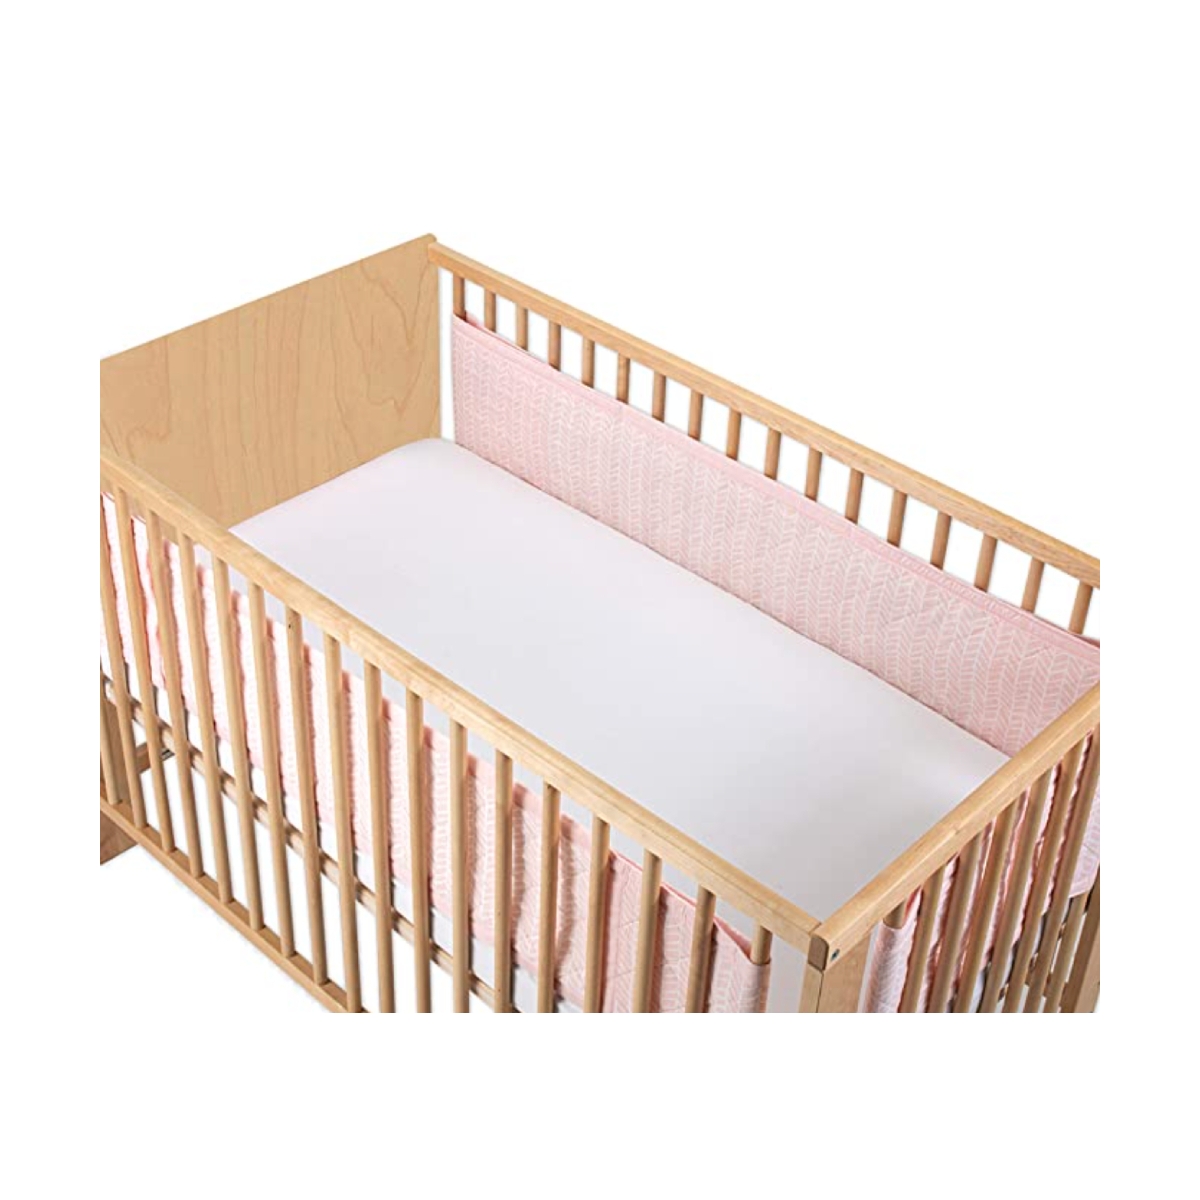 Airwrap 2 Sided Cot Protector